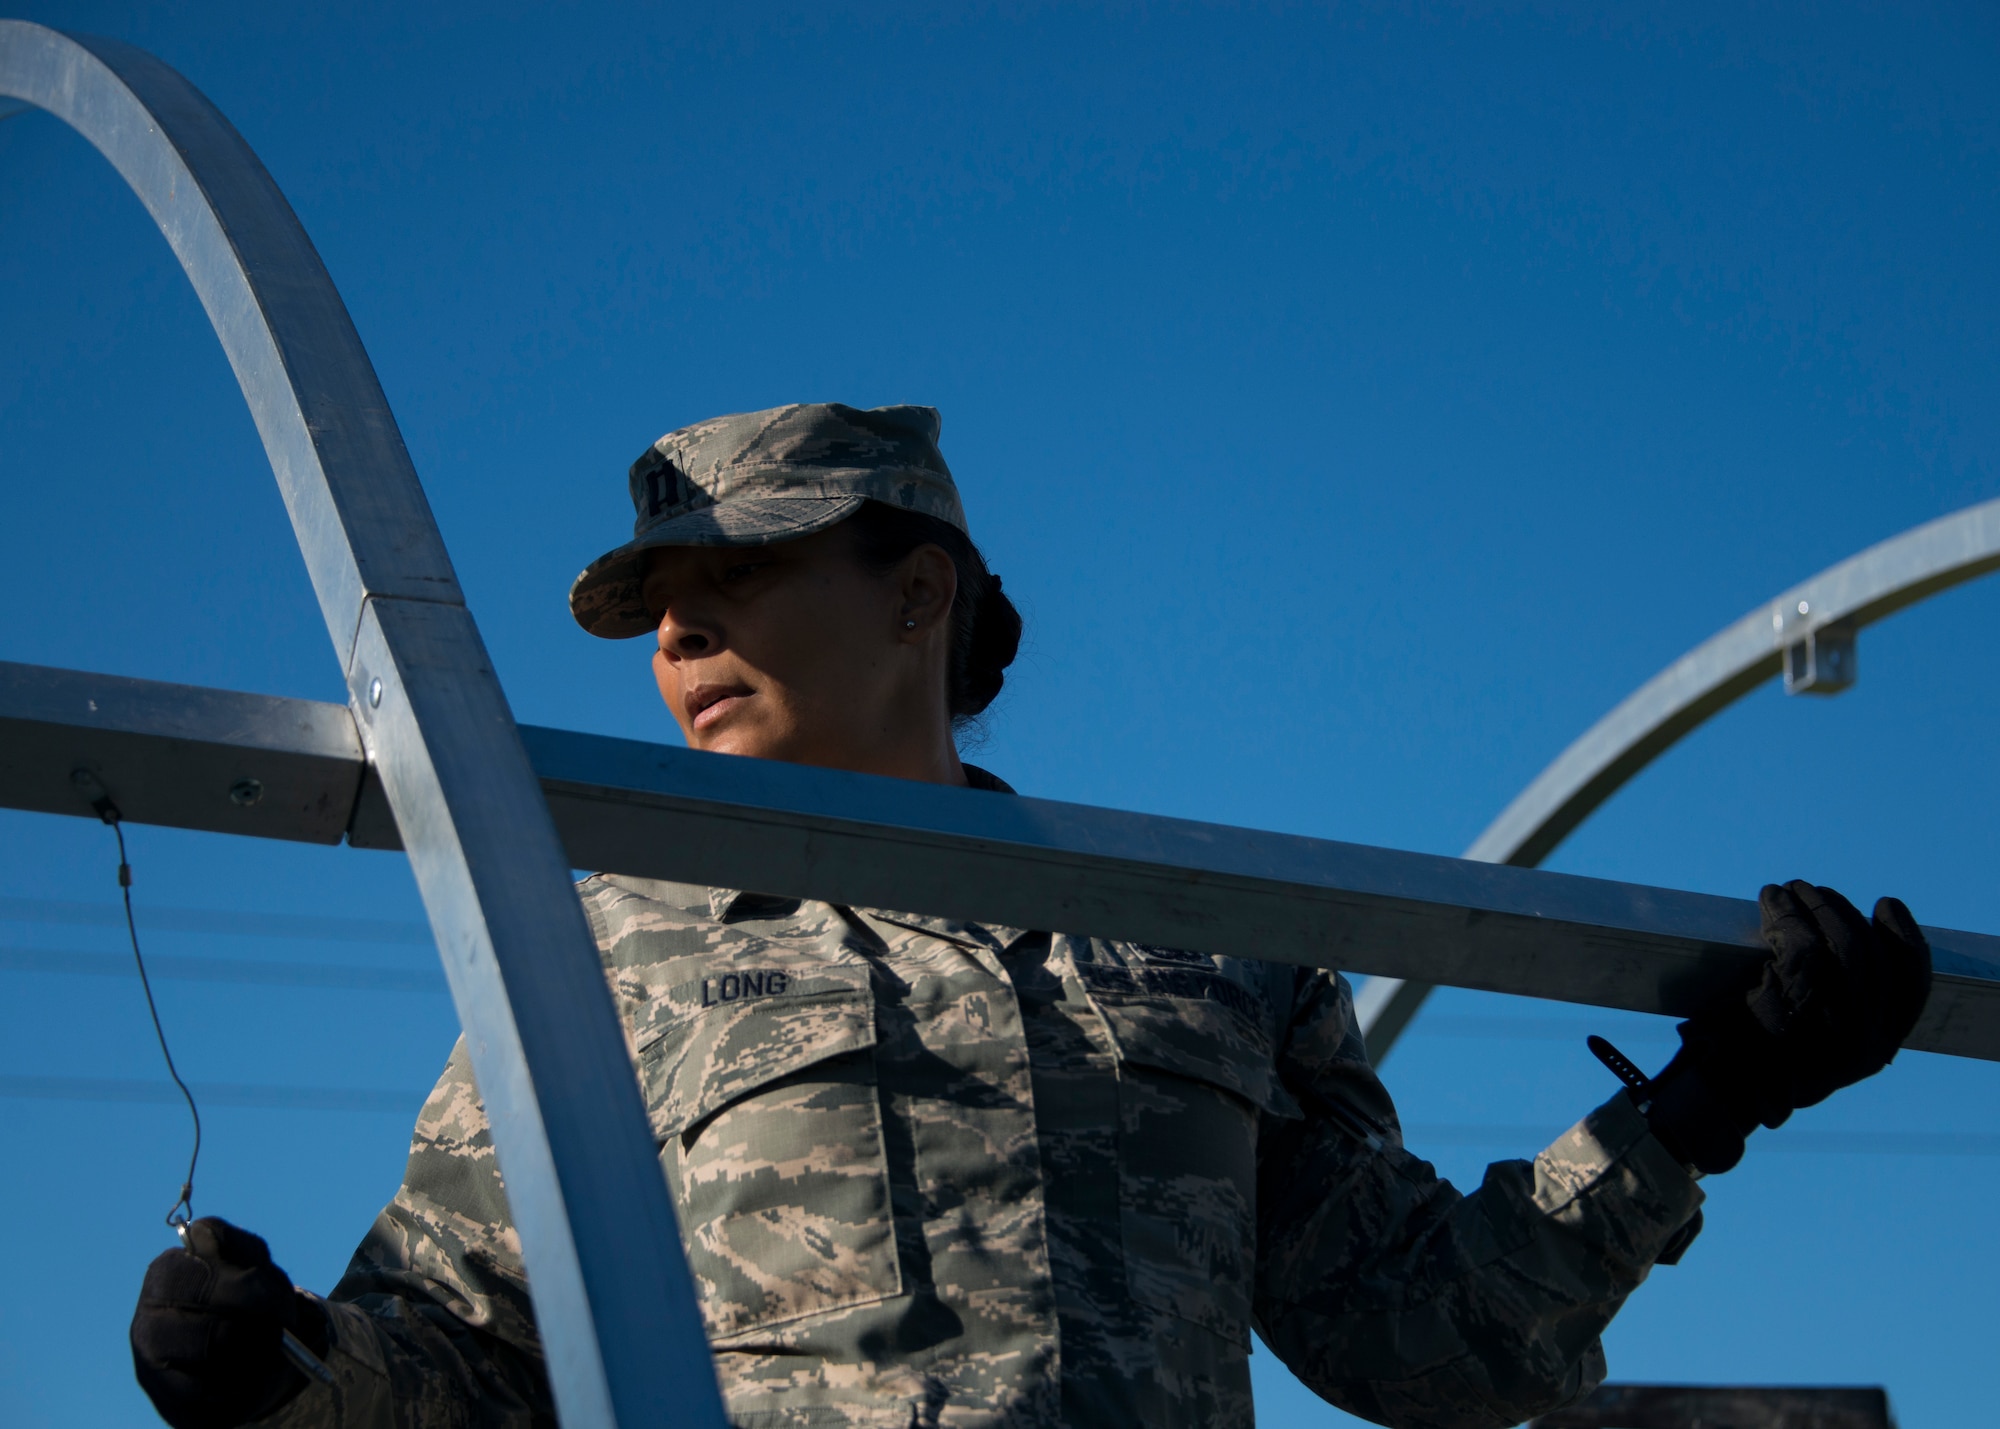 Capt. Sonya Long, 919th Special Operations Force Support Squadron, holds a beam in place during small shelter system training at Duke Field, Fla., Sept. 13. The shelter takes six fully trained personnel approximately three and a half hours to complete. The SSS training is part of annual home station readiness training for all members of the squadron. (U.S. Air Force photo/ Tech. Sgt. Jasmin Taylor)  